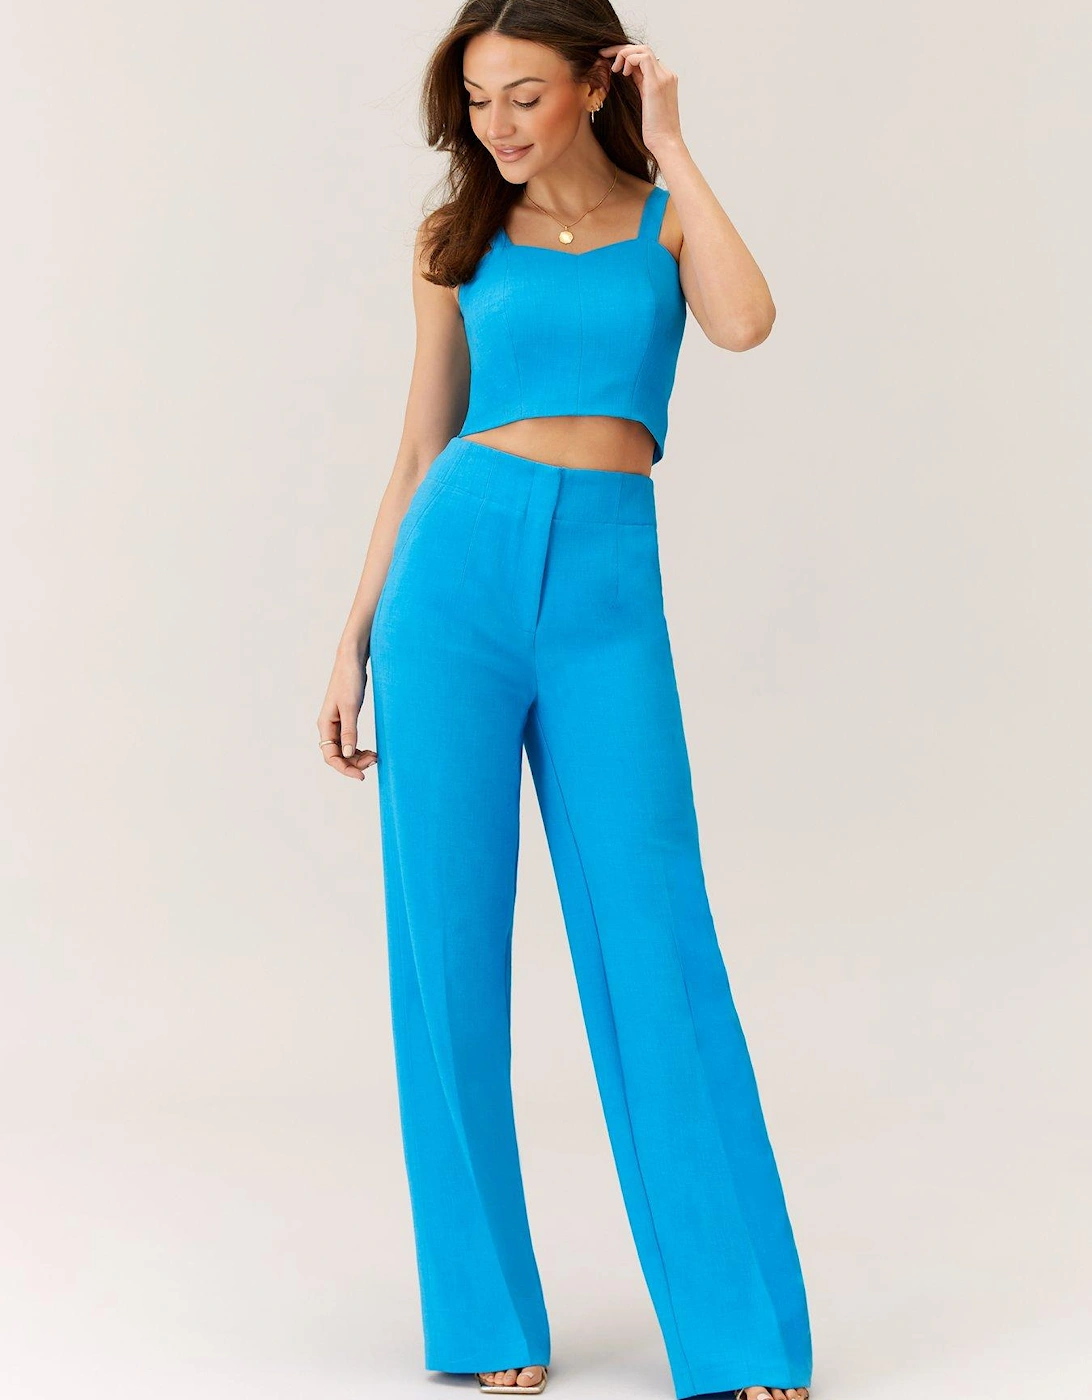 Sweetheart Neck Strappy Top - Blue